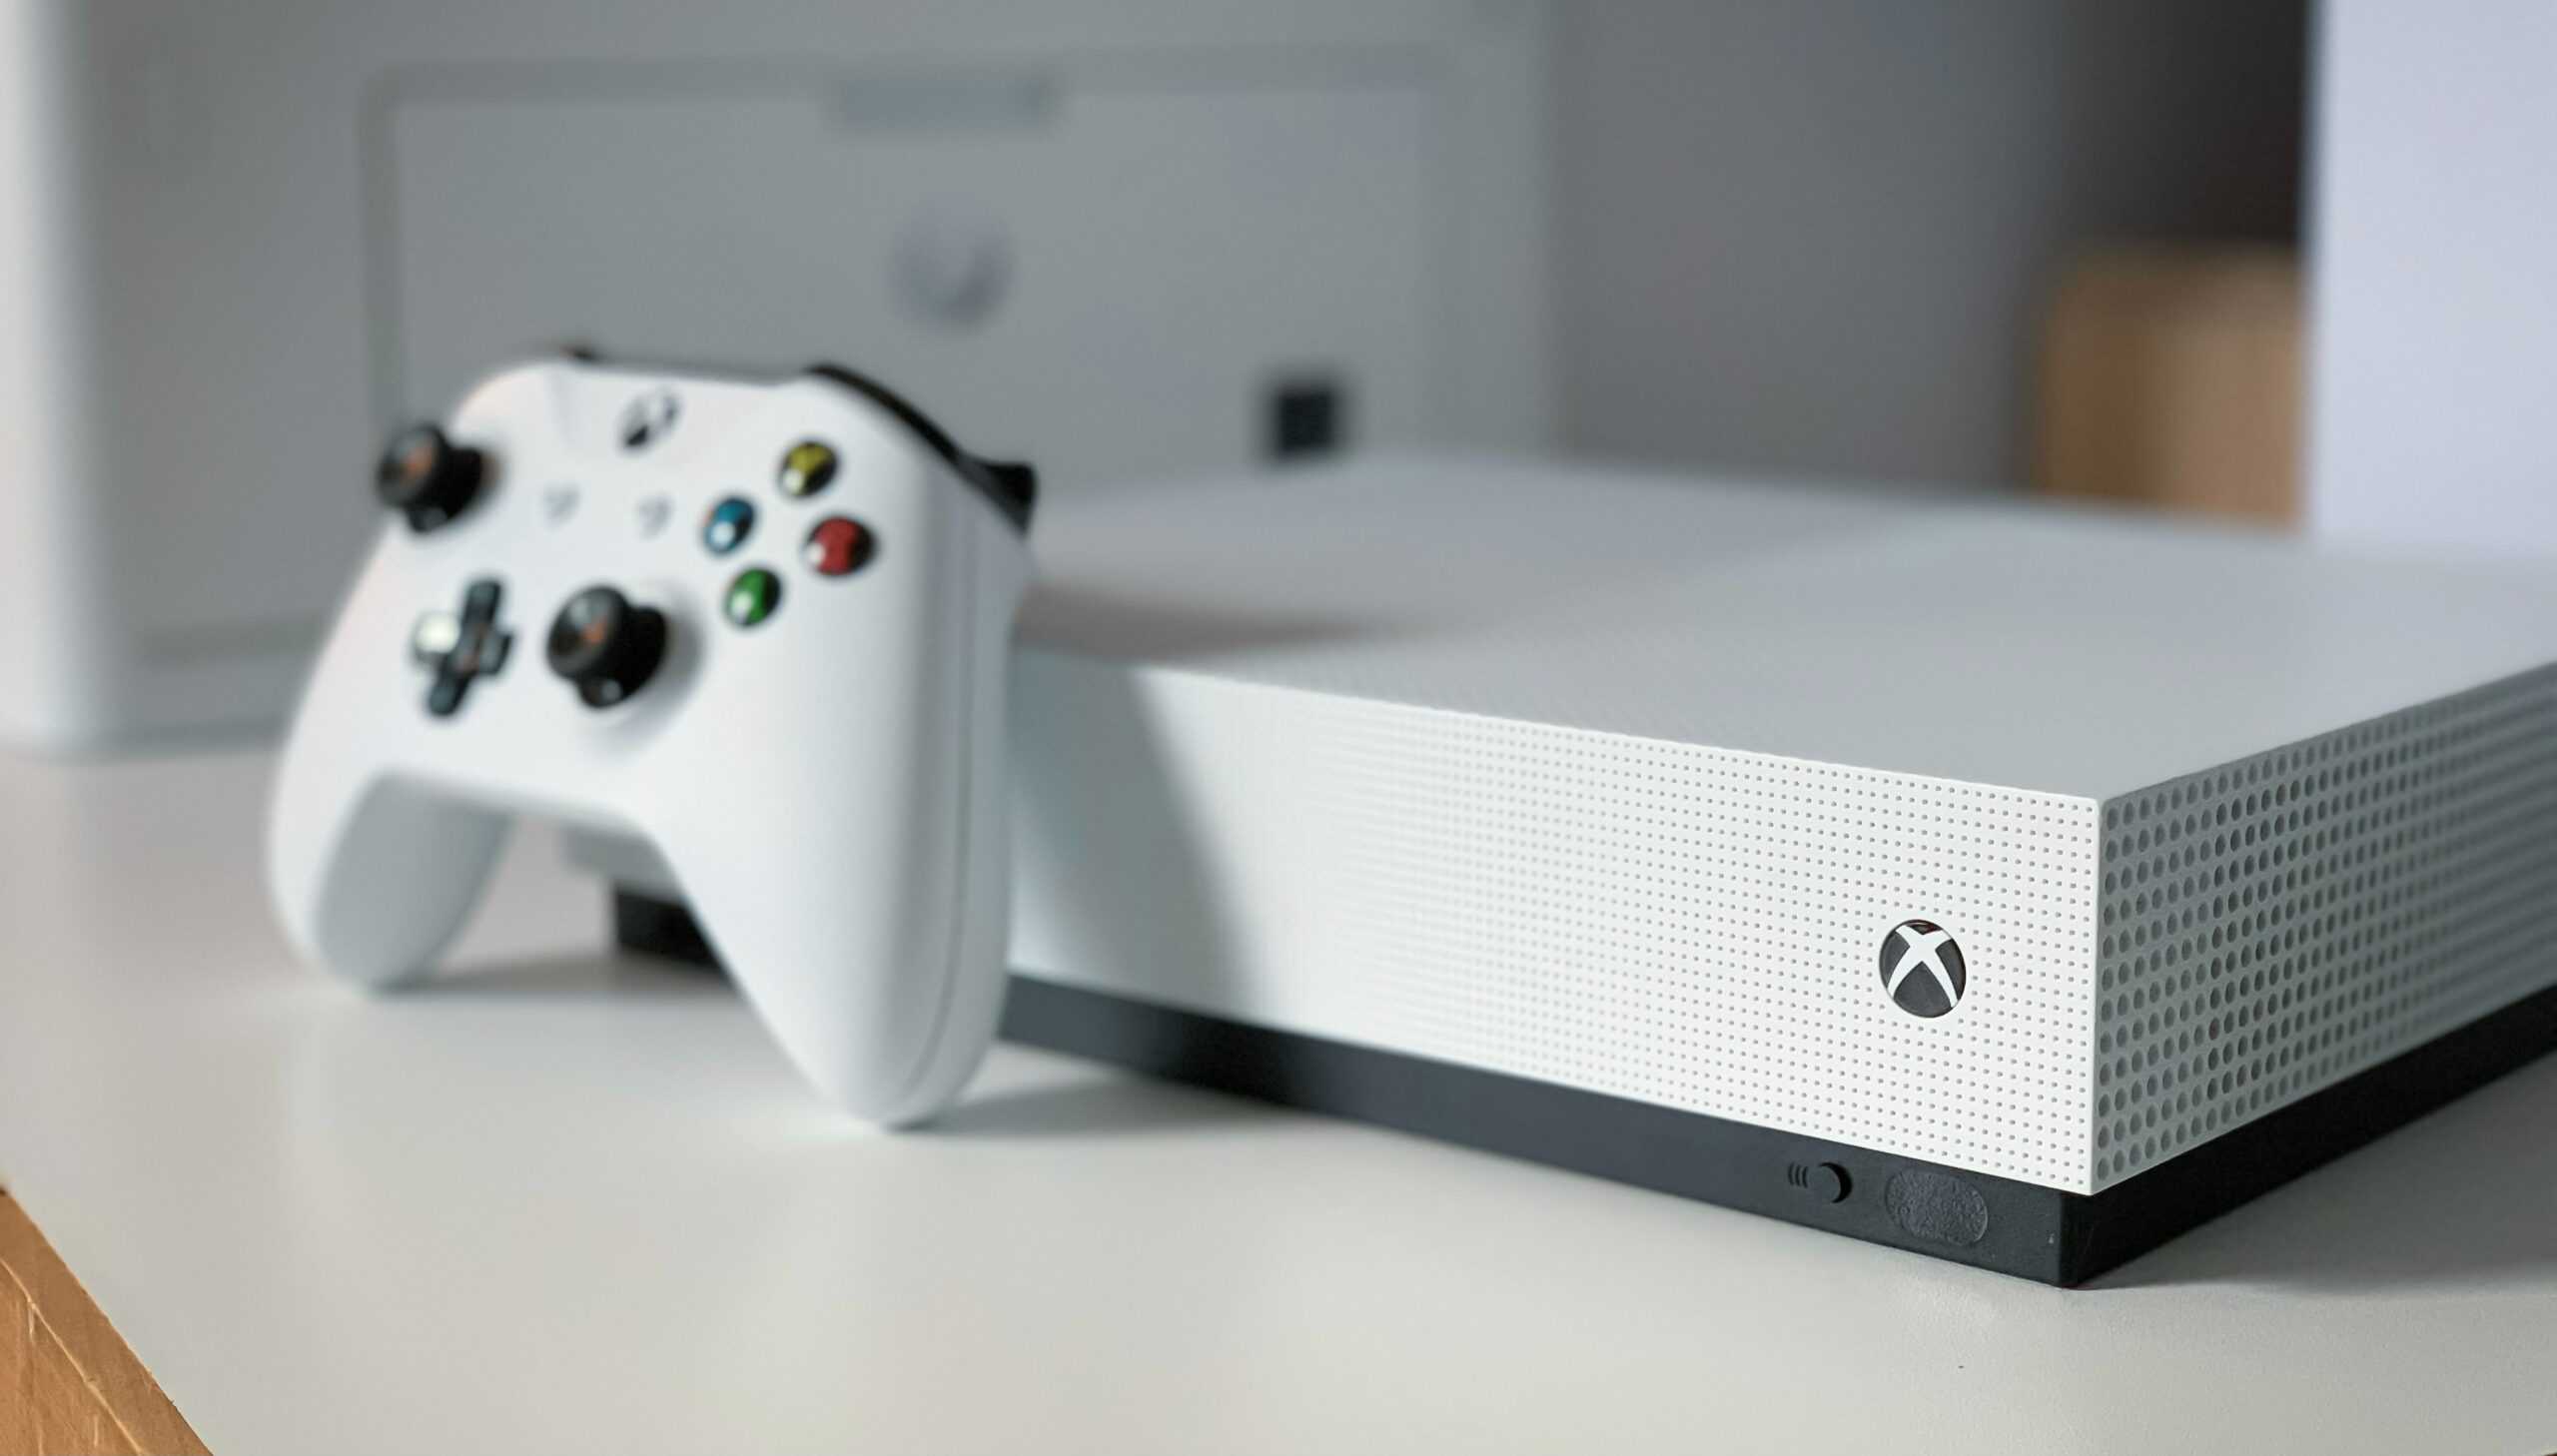 Xbox One S All-Digital Edition console announced